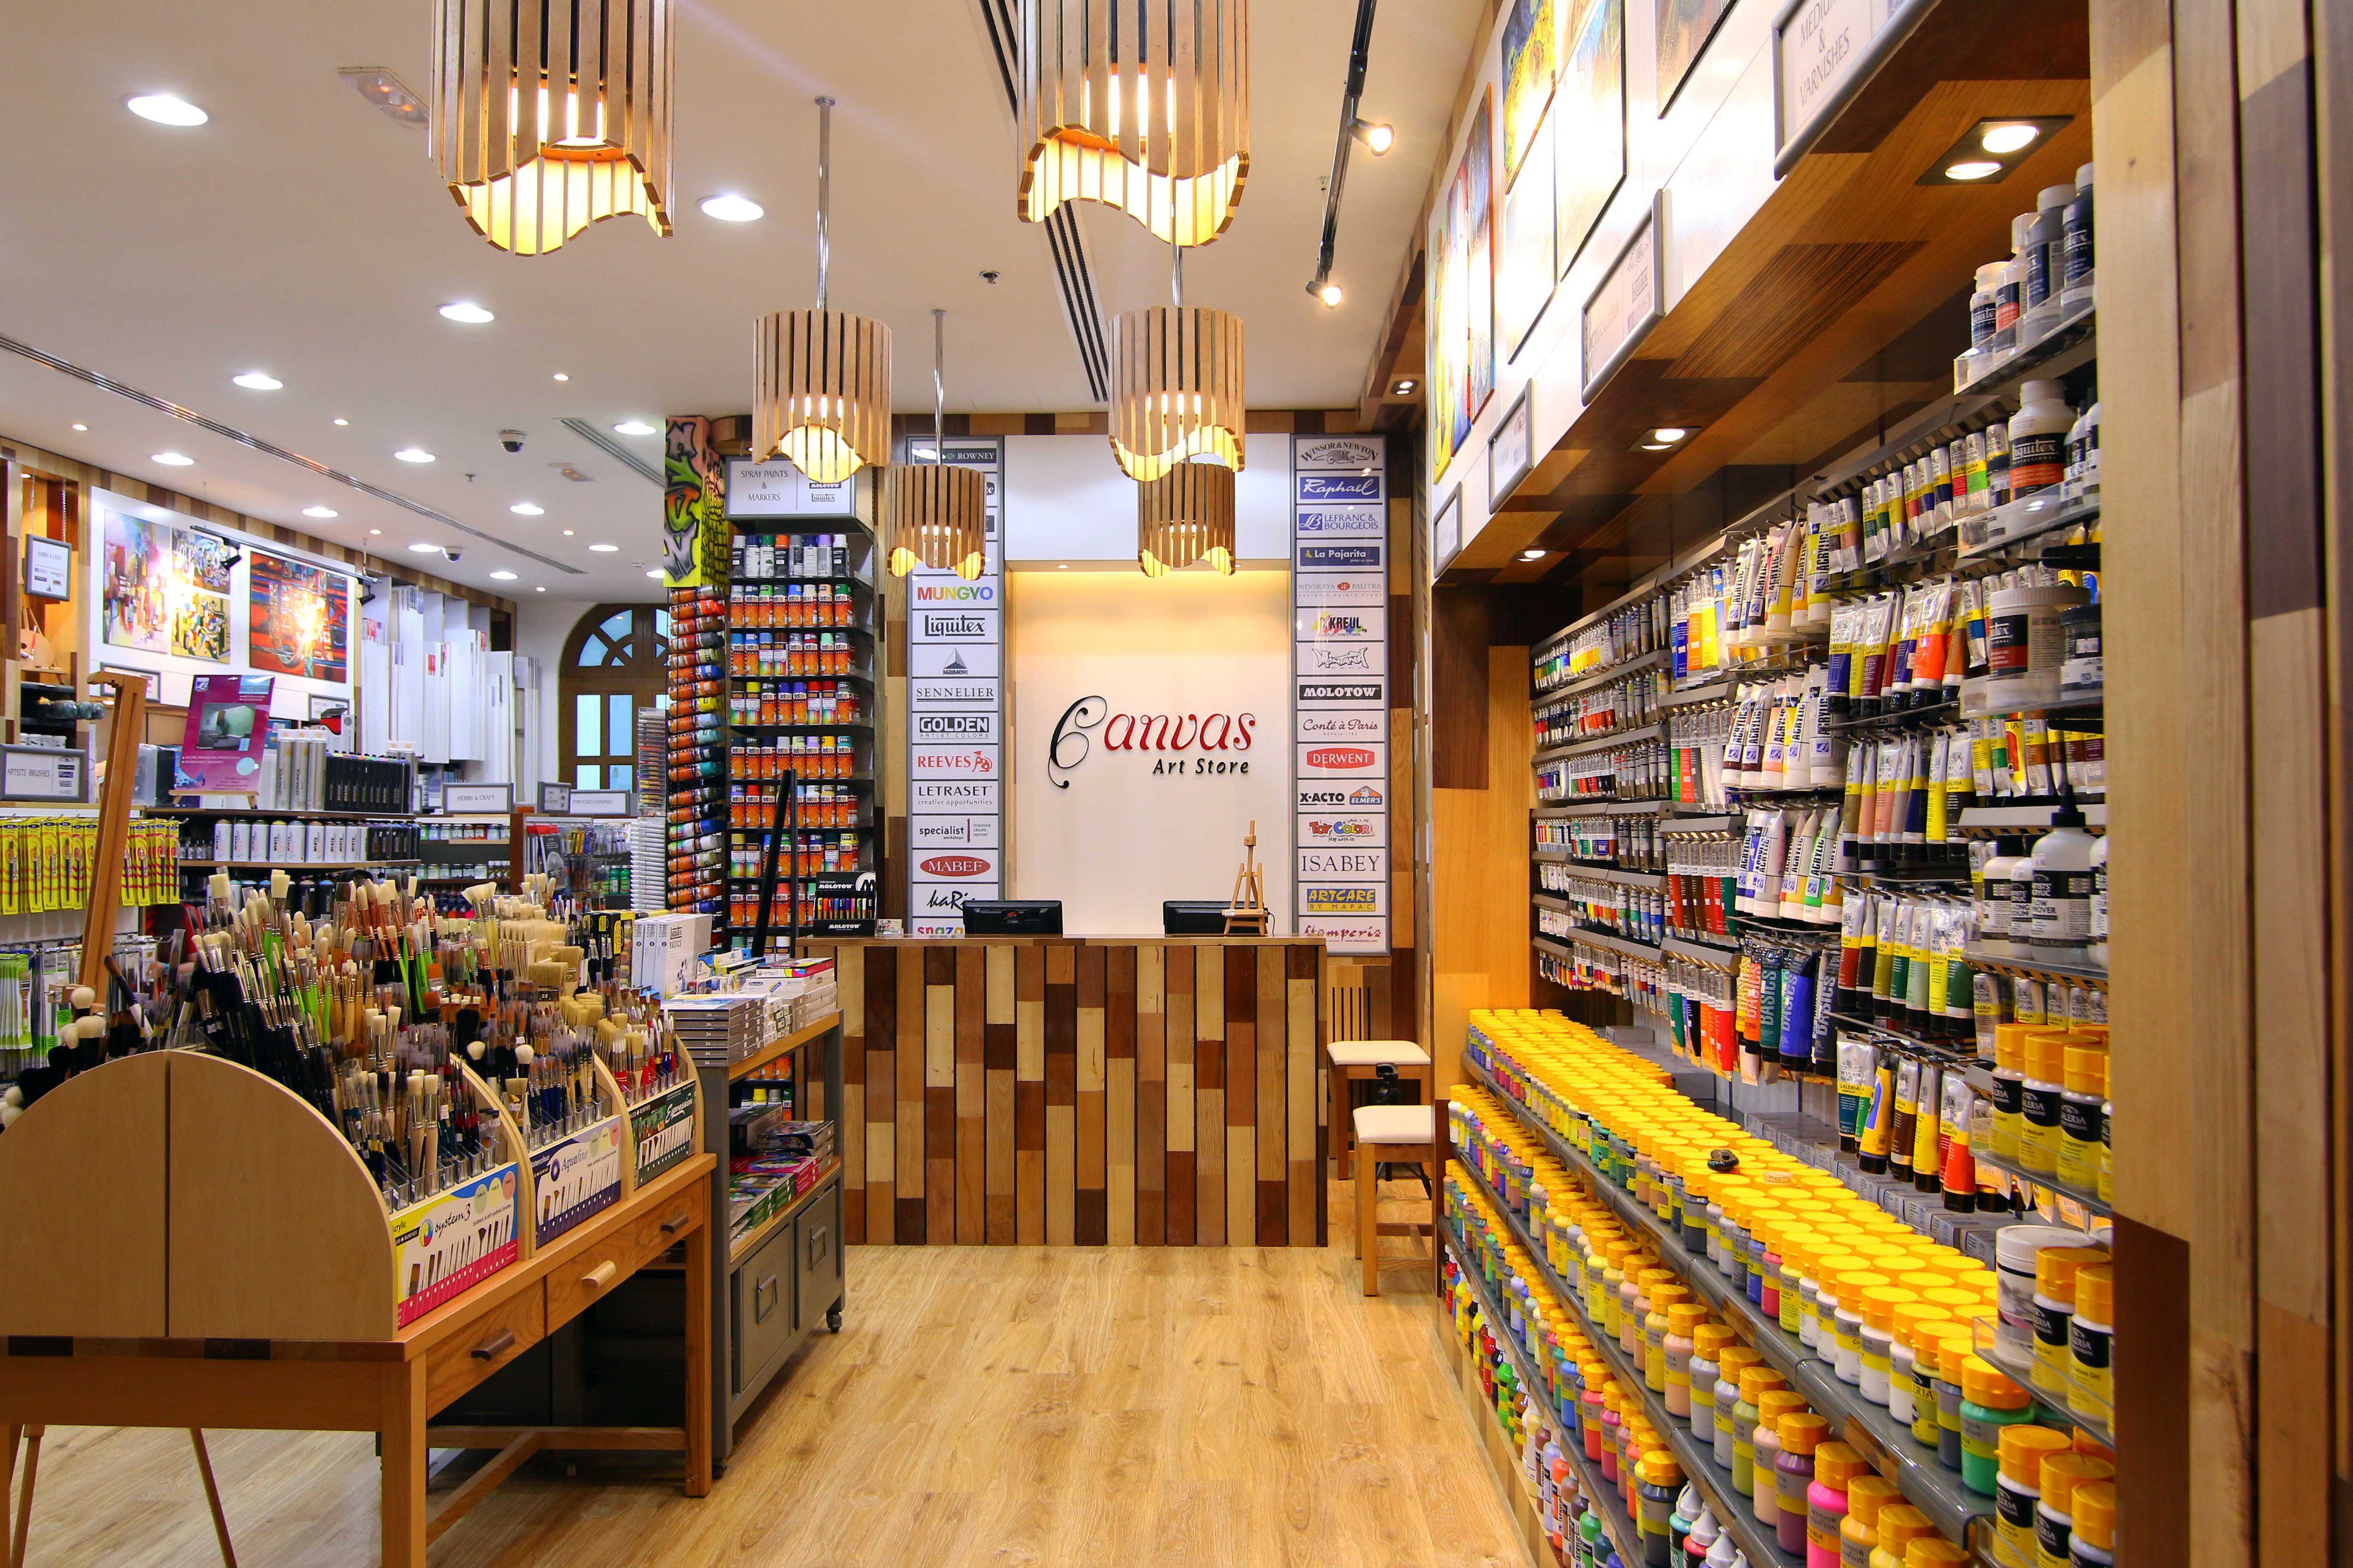 Canvas Art Store on Twitter: "Canvas Art Store is NOW OPEN in @MercatoMall  ...Jumeirah.Stop by and check out our huge variety of Art Supplies.  https://t.co/5urVwjbFkO https://t.co/IoNkwIUNUZ" / Twitter